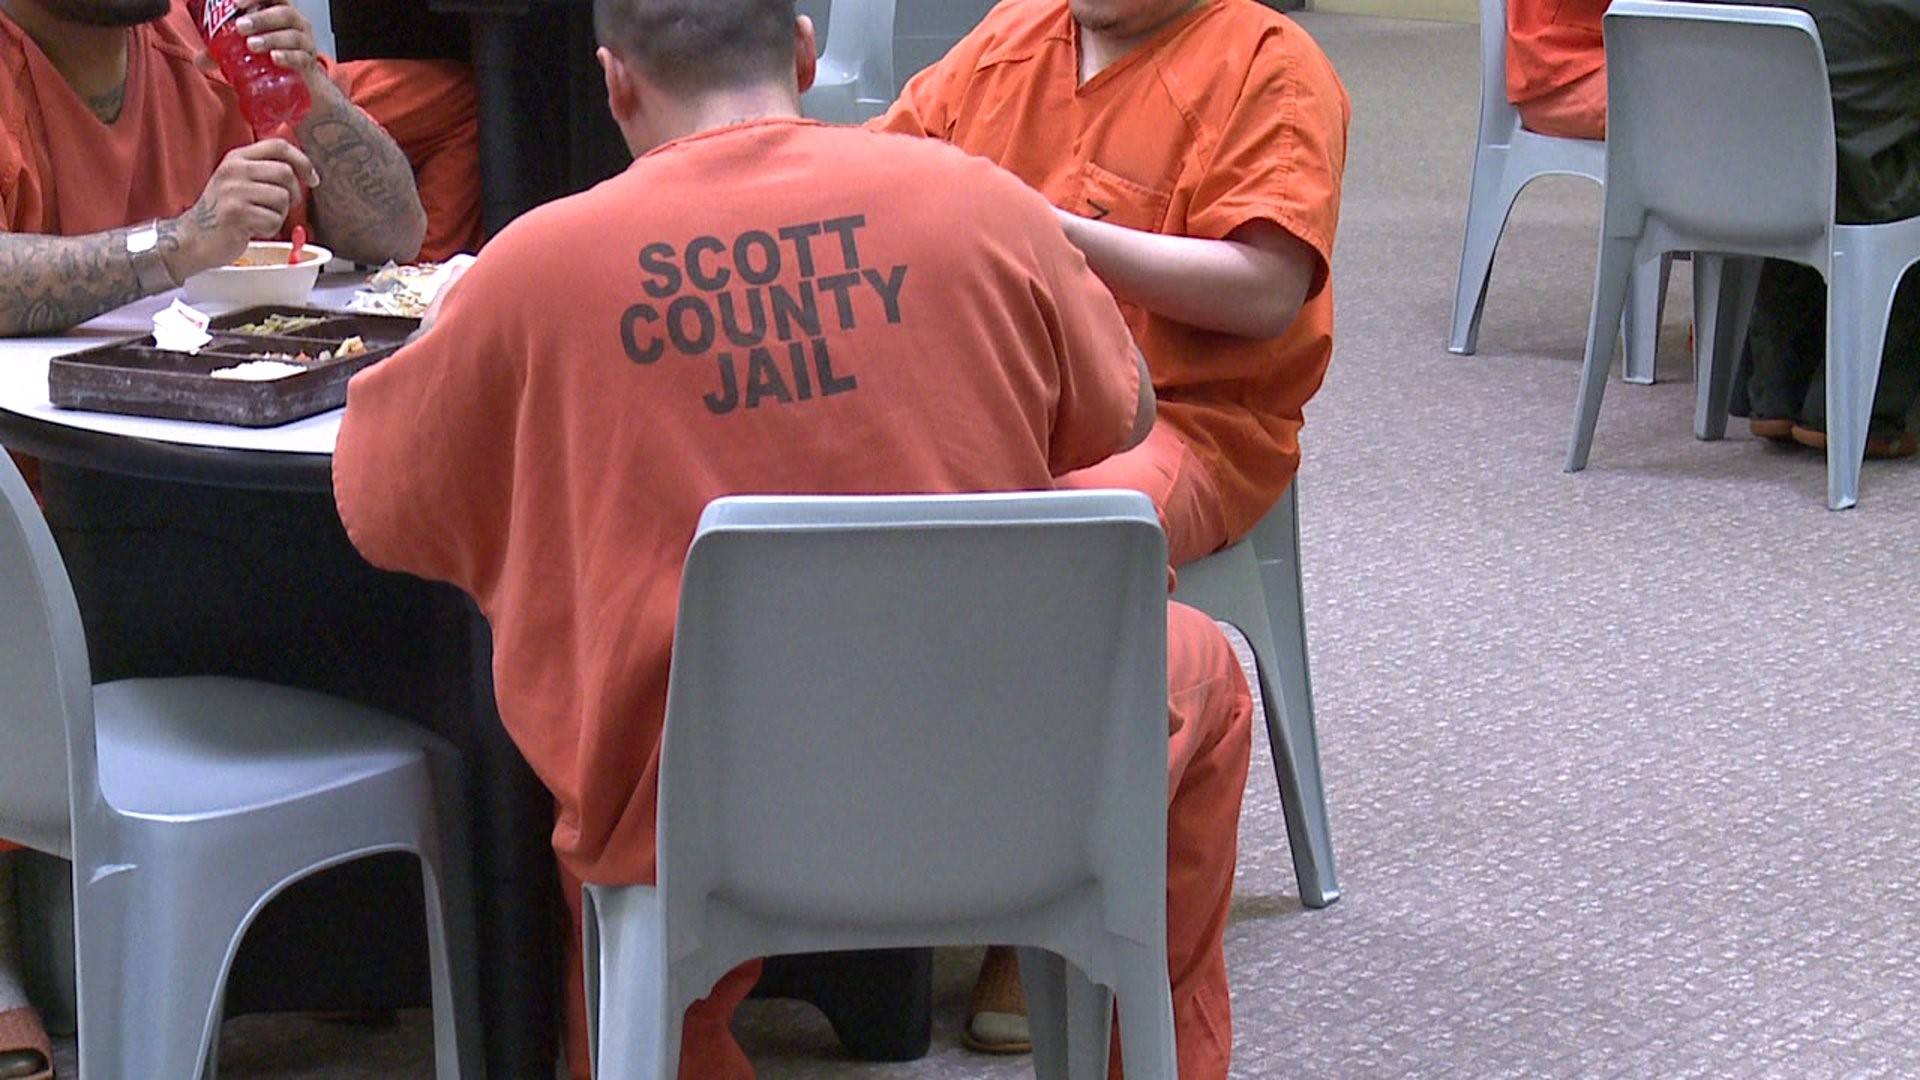 Clinton County agrees to take on Scott County inmates